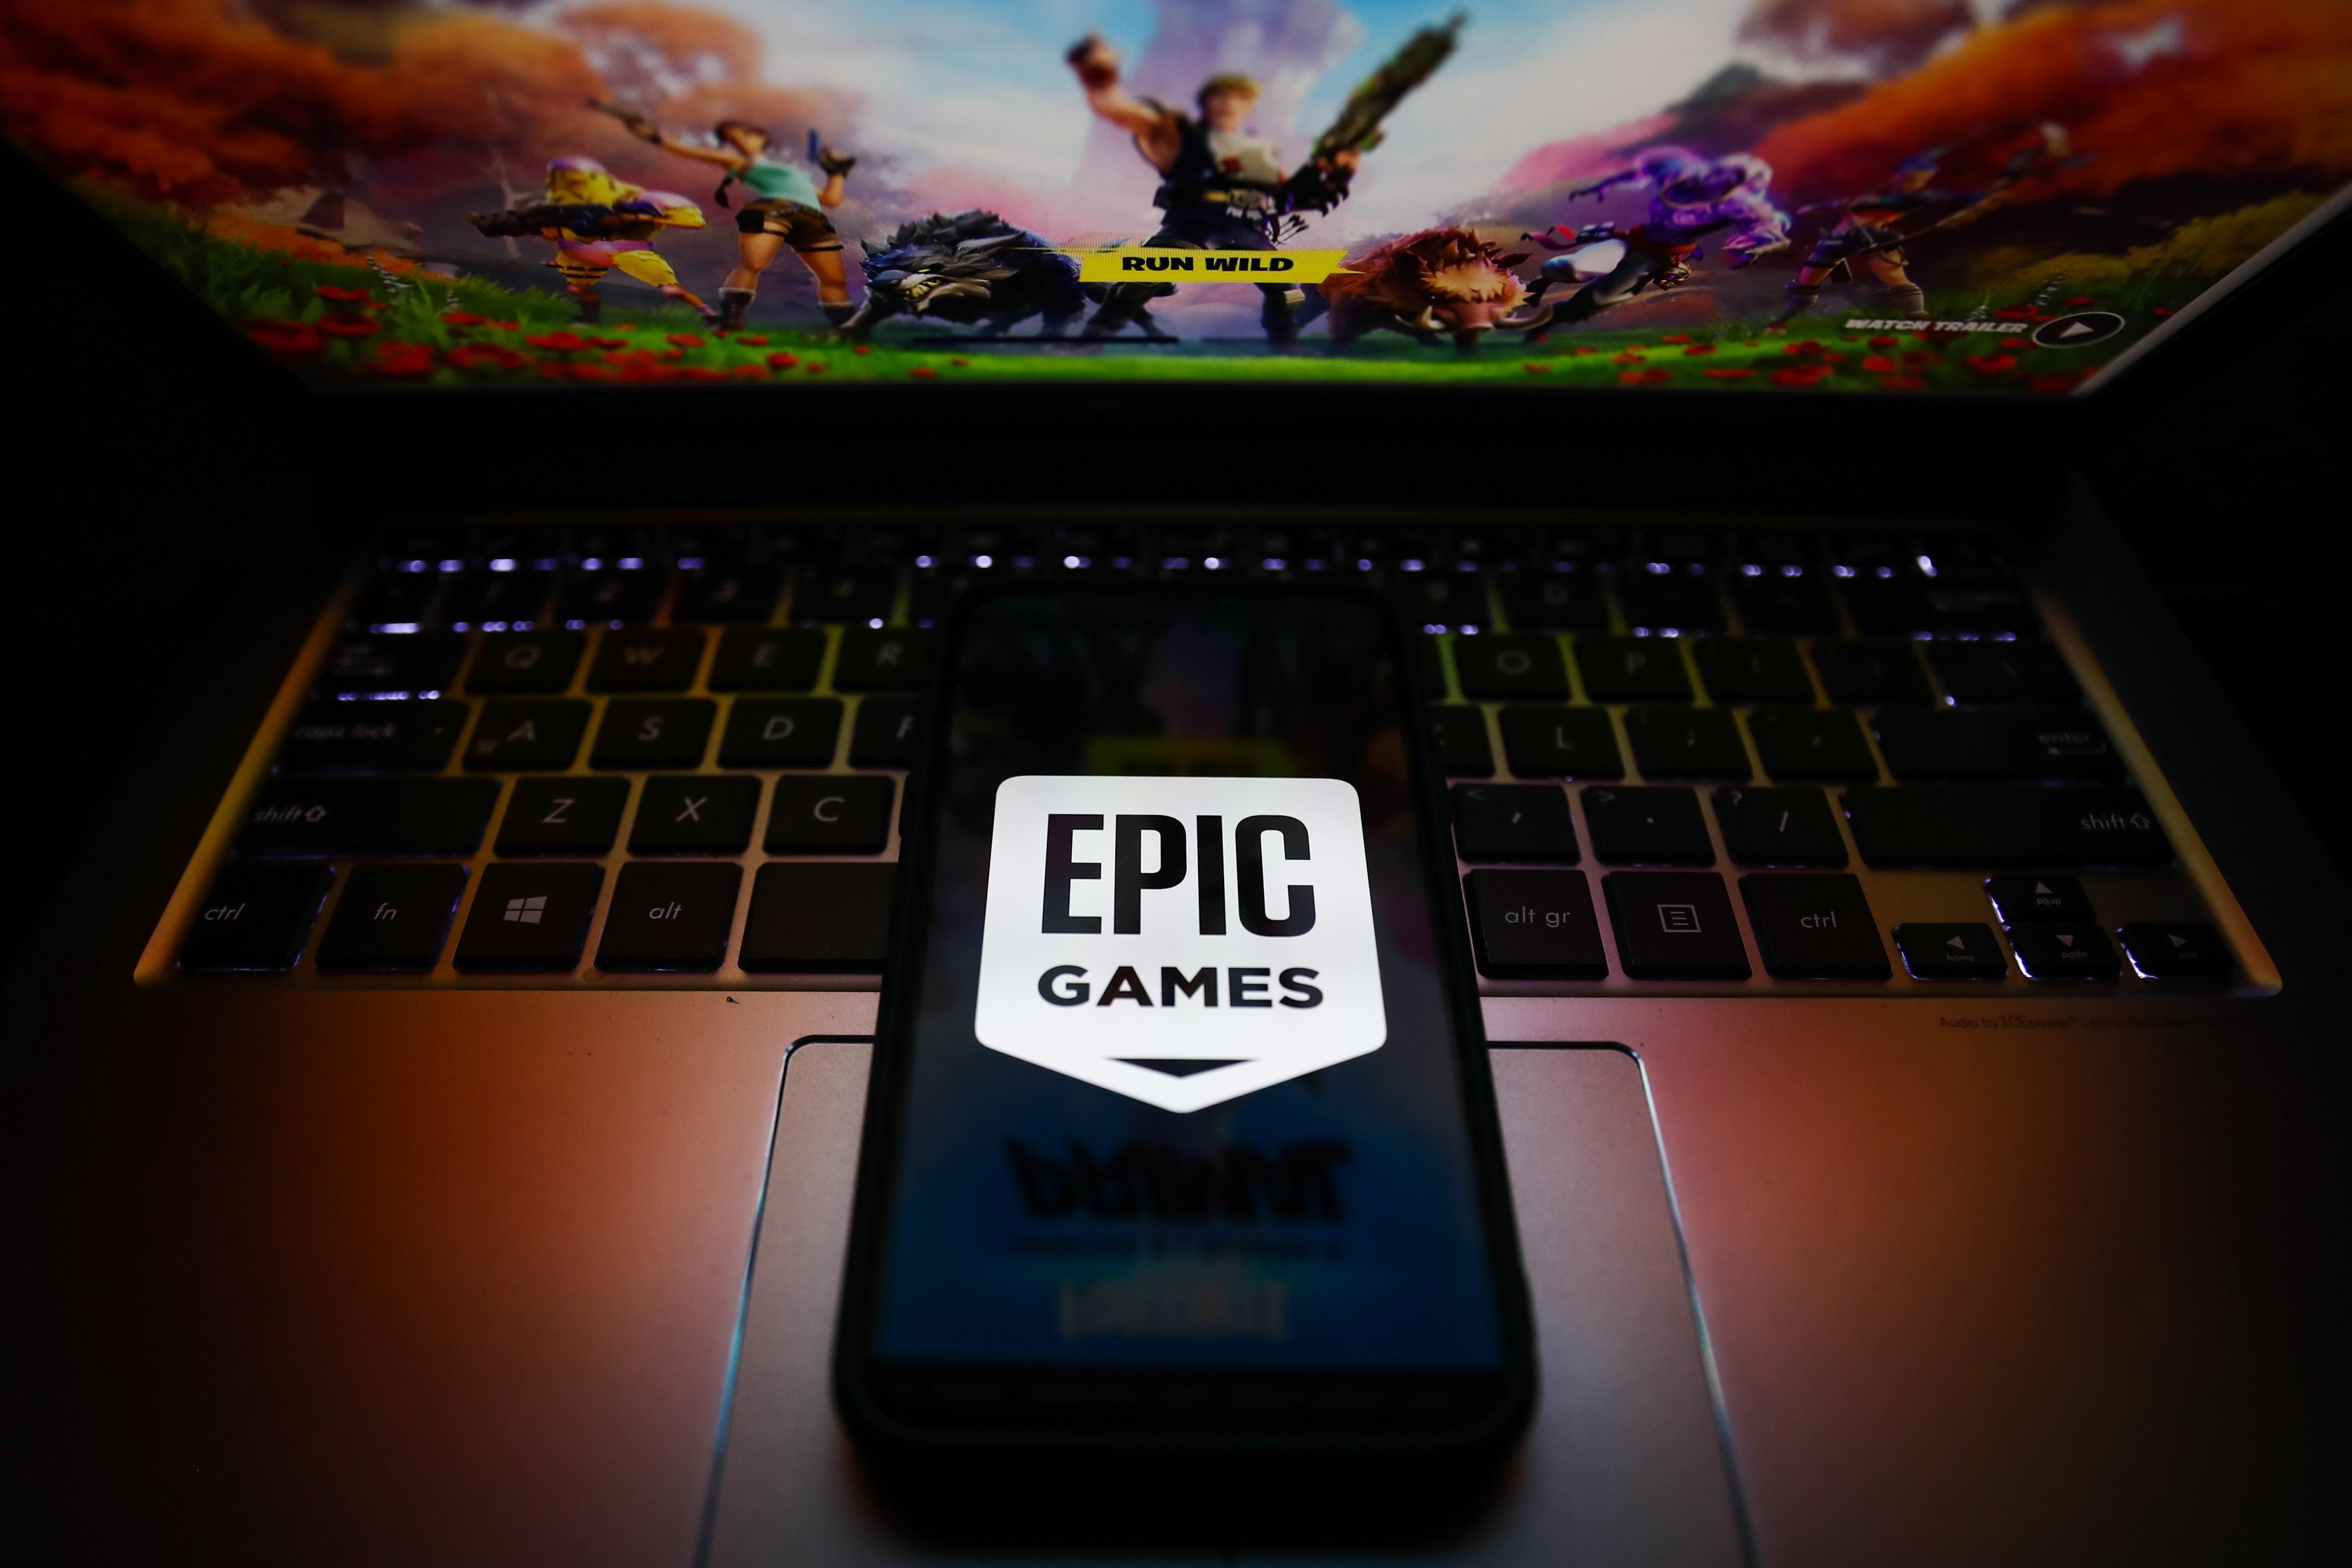 Epic Games, the metaverse and the consolidation of the games industry